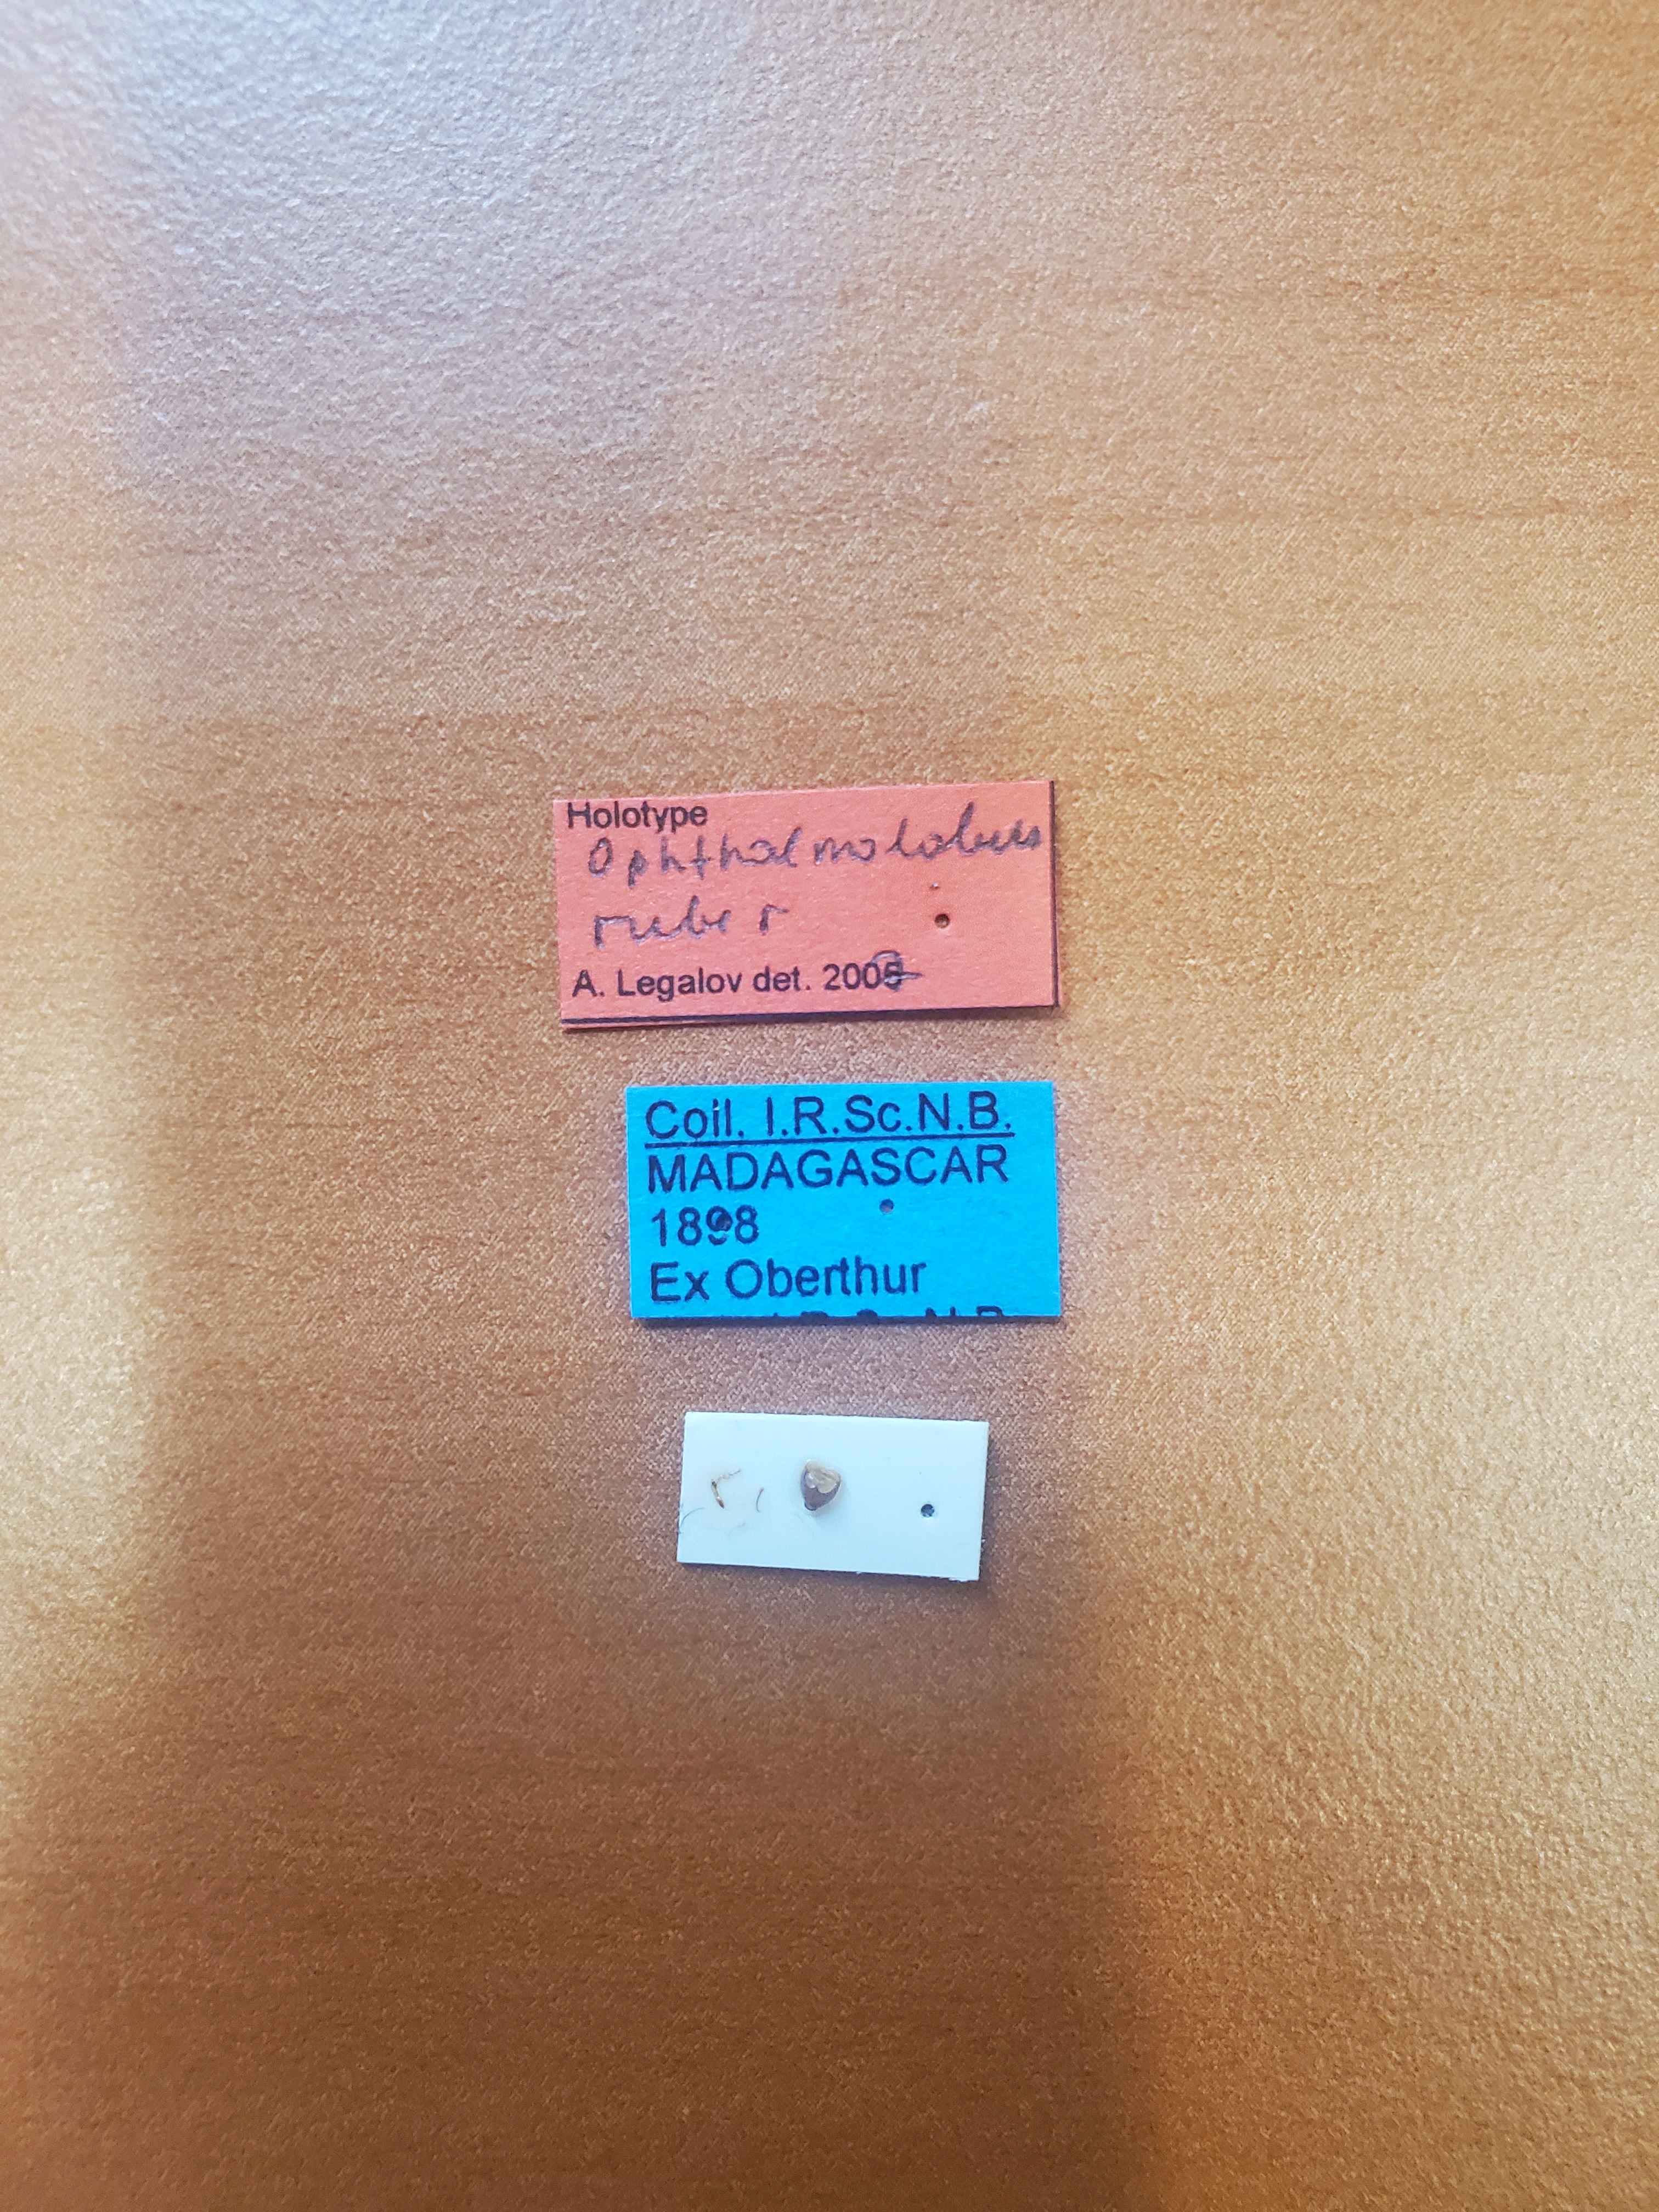 Ophthalmolabus ruber ht Labels